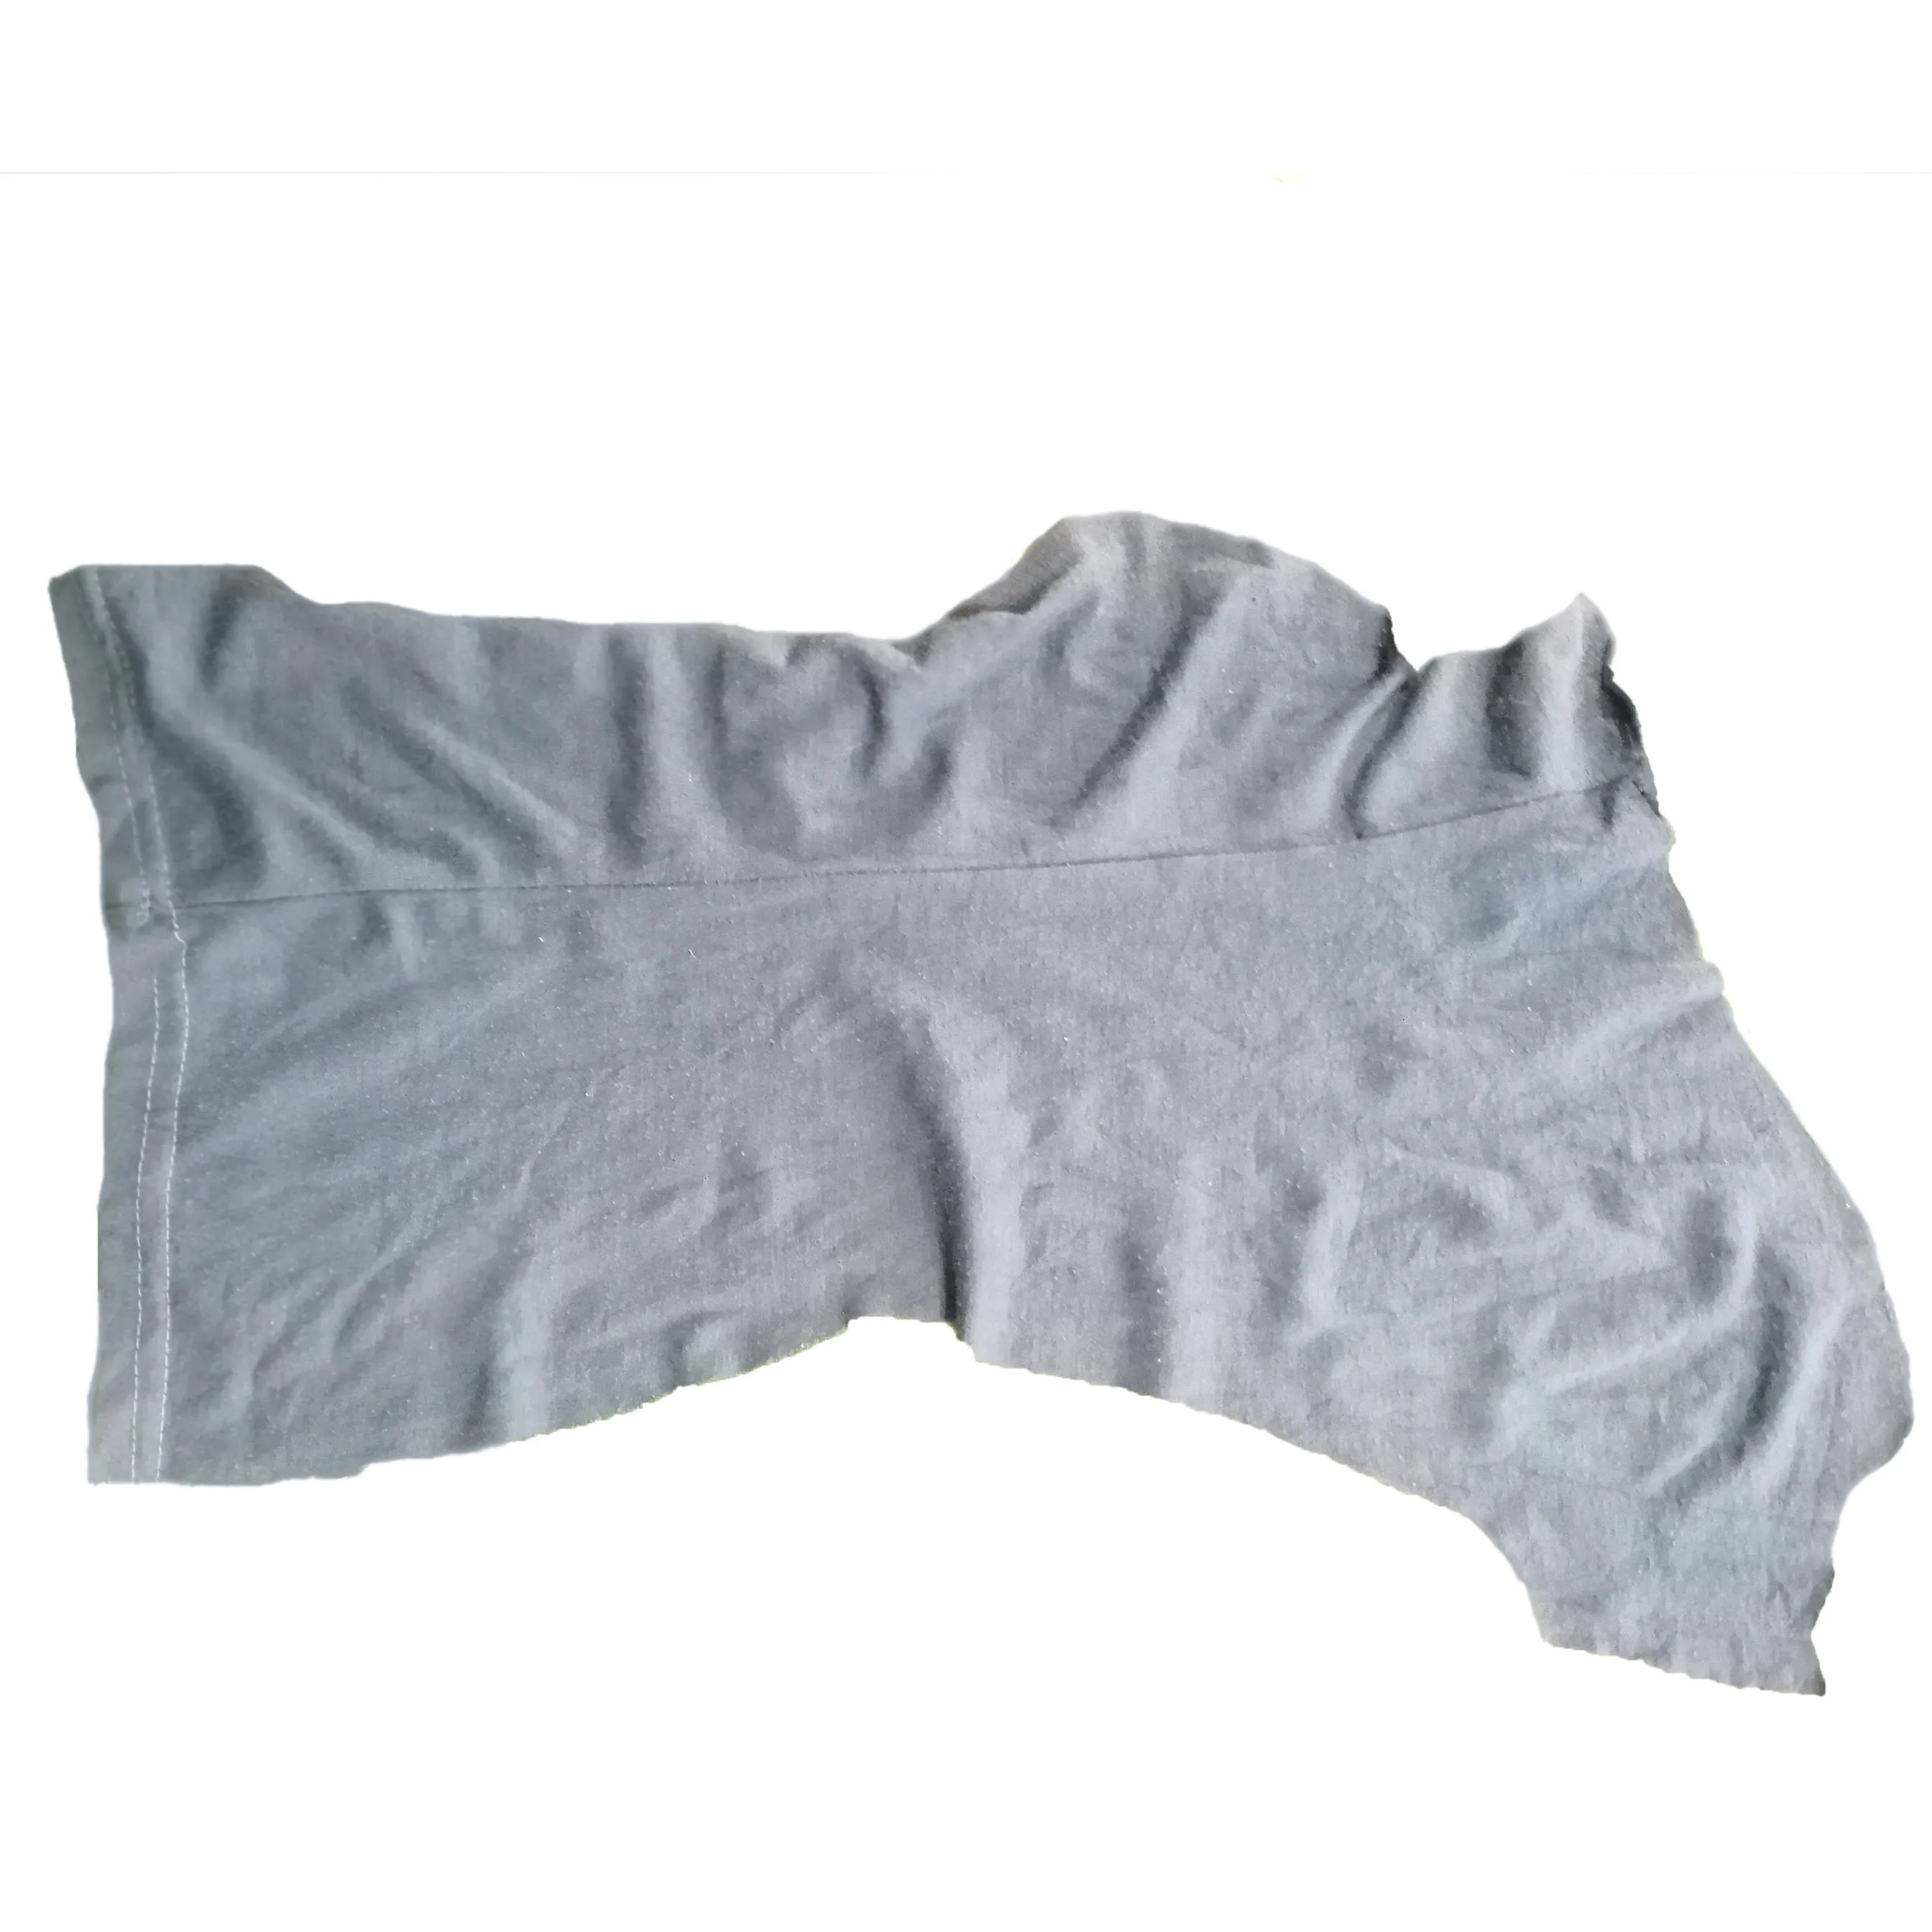 
Industrial use cleaning wiping fabric rags 35cm 55cm t shirt mixed color 100% cotton rags 